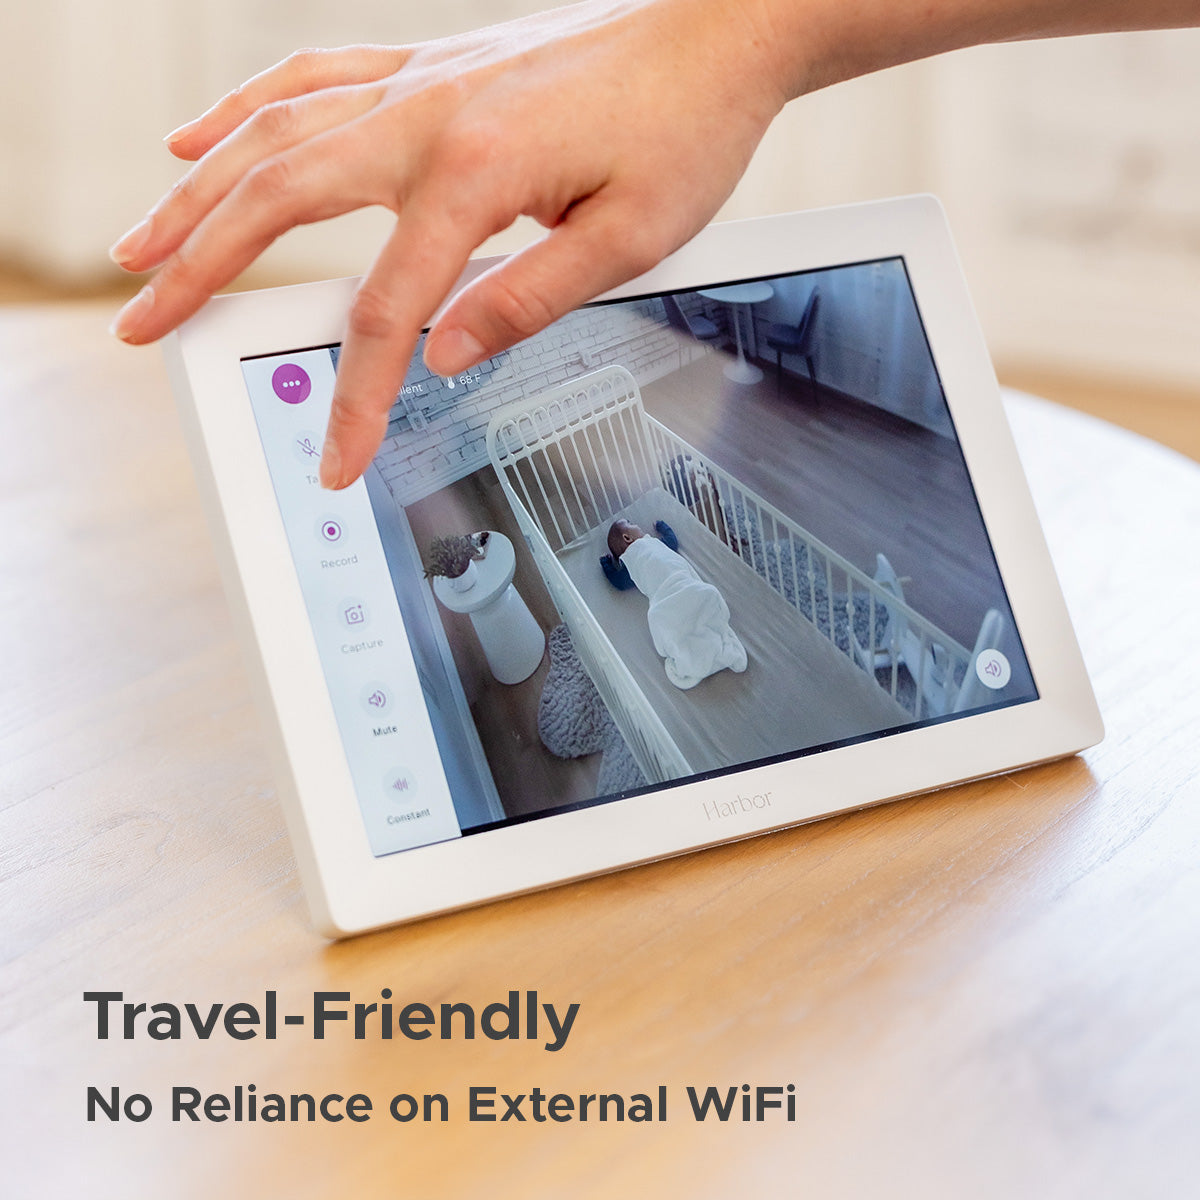 image of hand on monitor with text overlay: Travel-Friendly. No Reliance on External WiFi